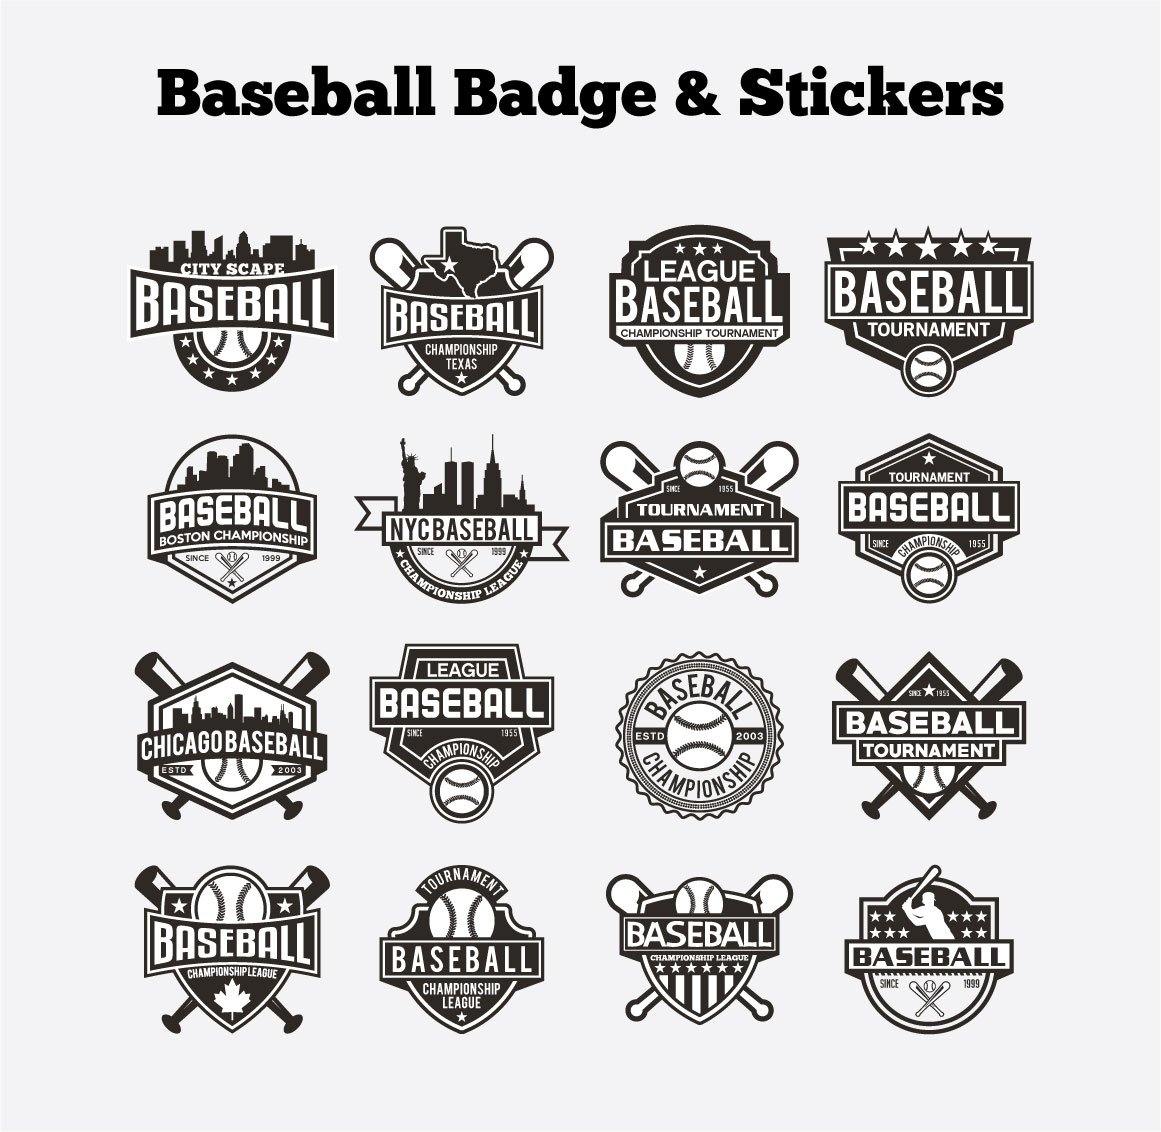 Baseball Badge & Stickers Vol3 cover image.